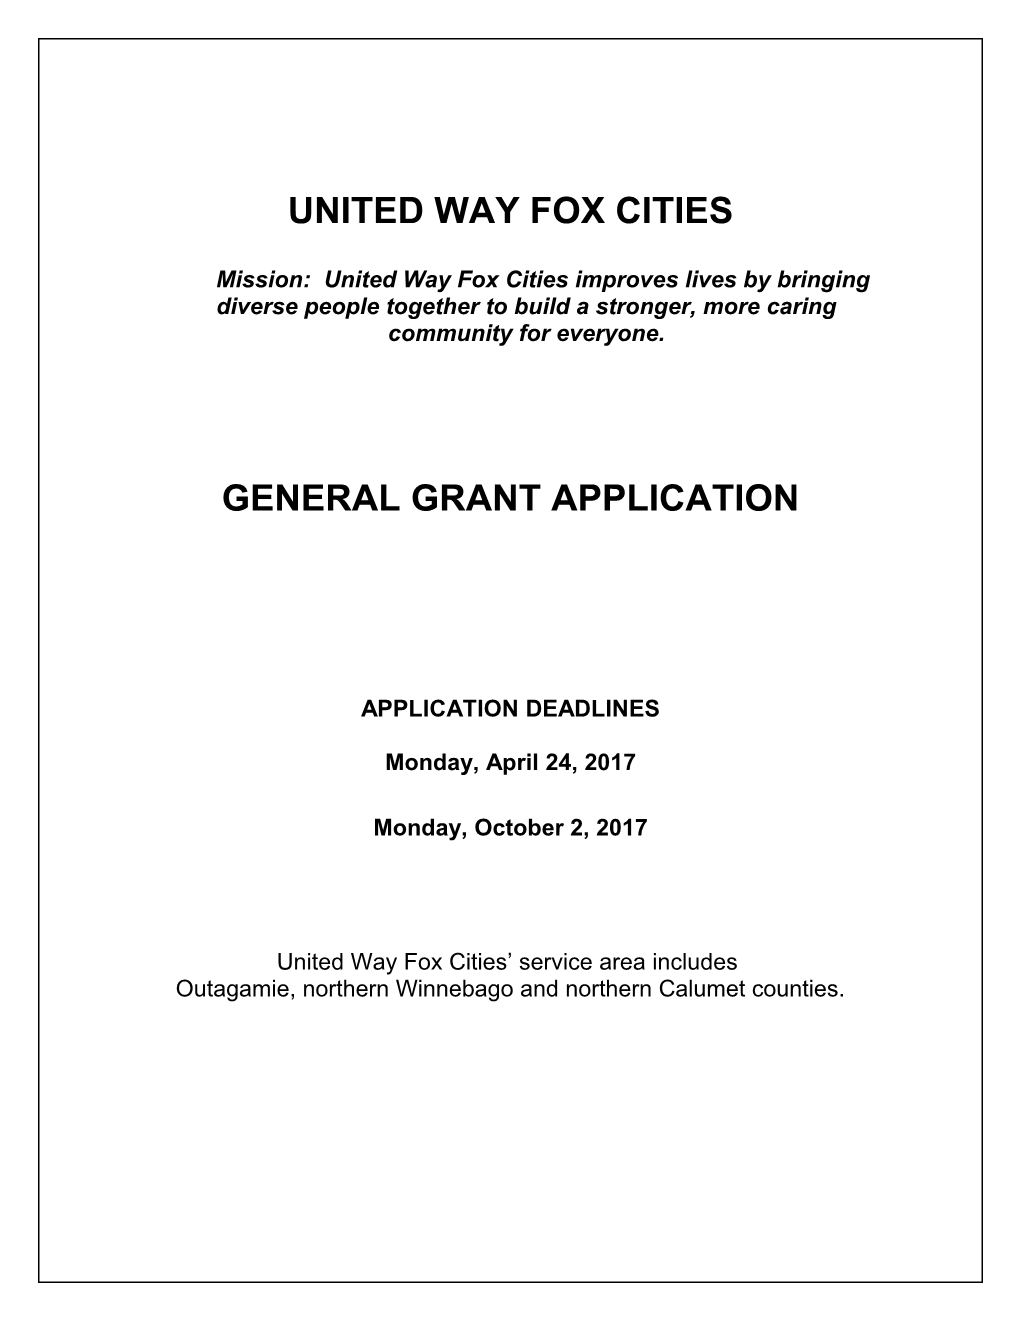 The Community Investment Grant Fund